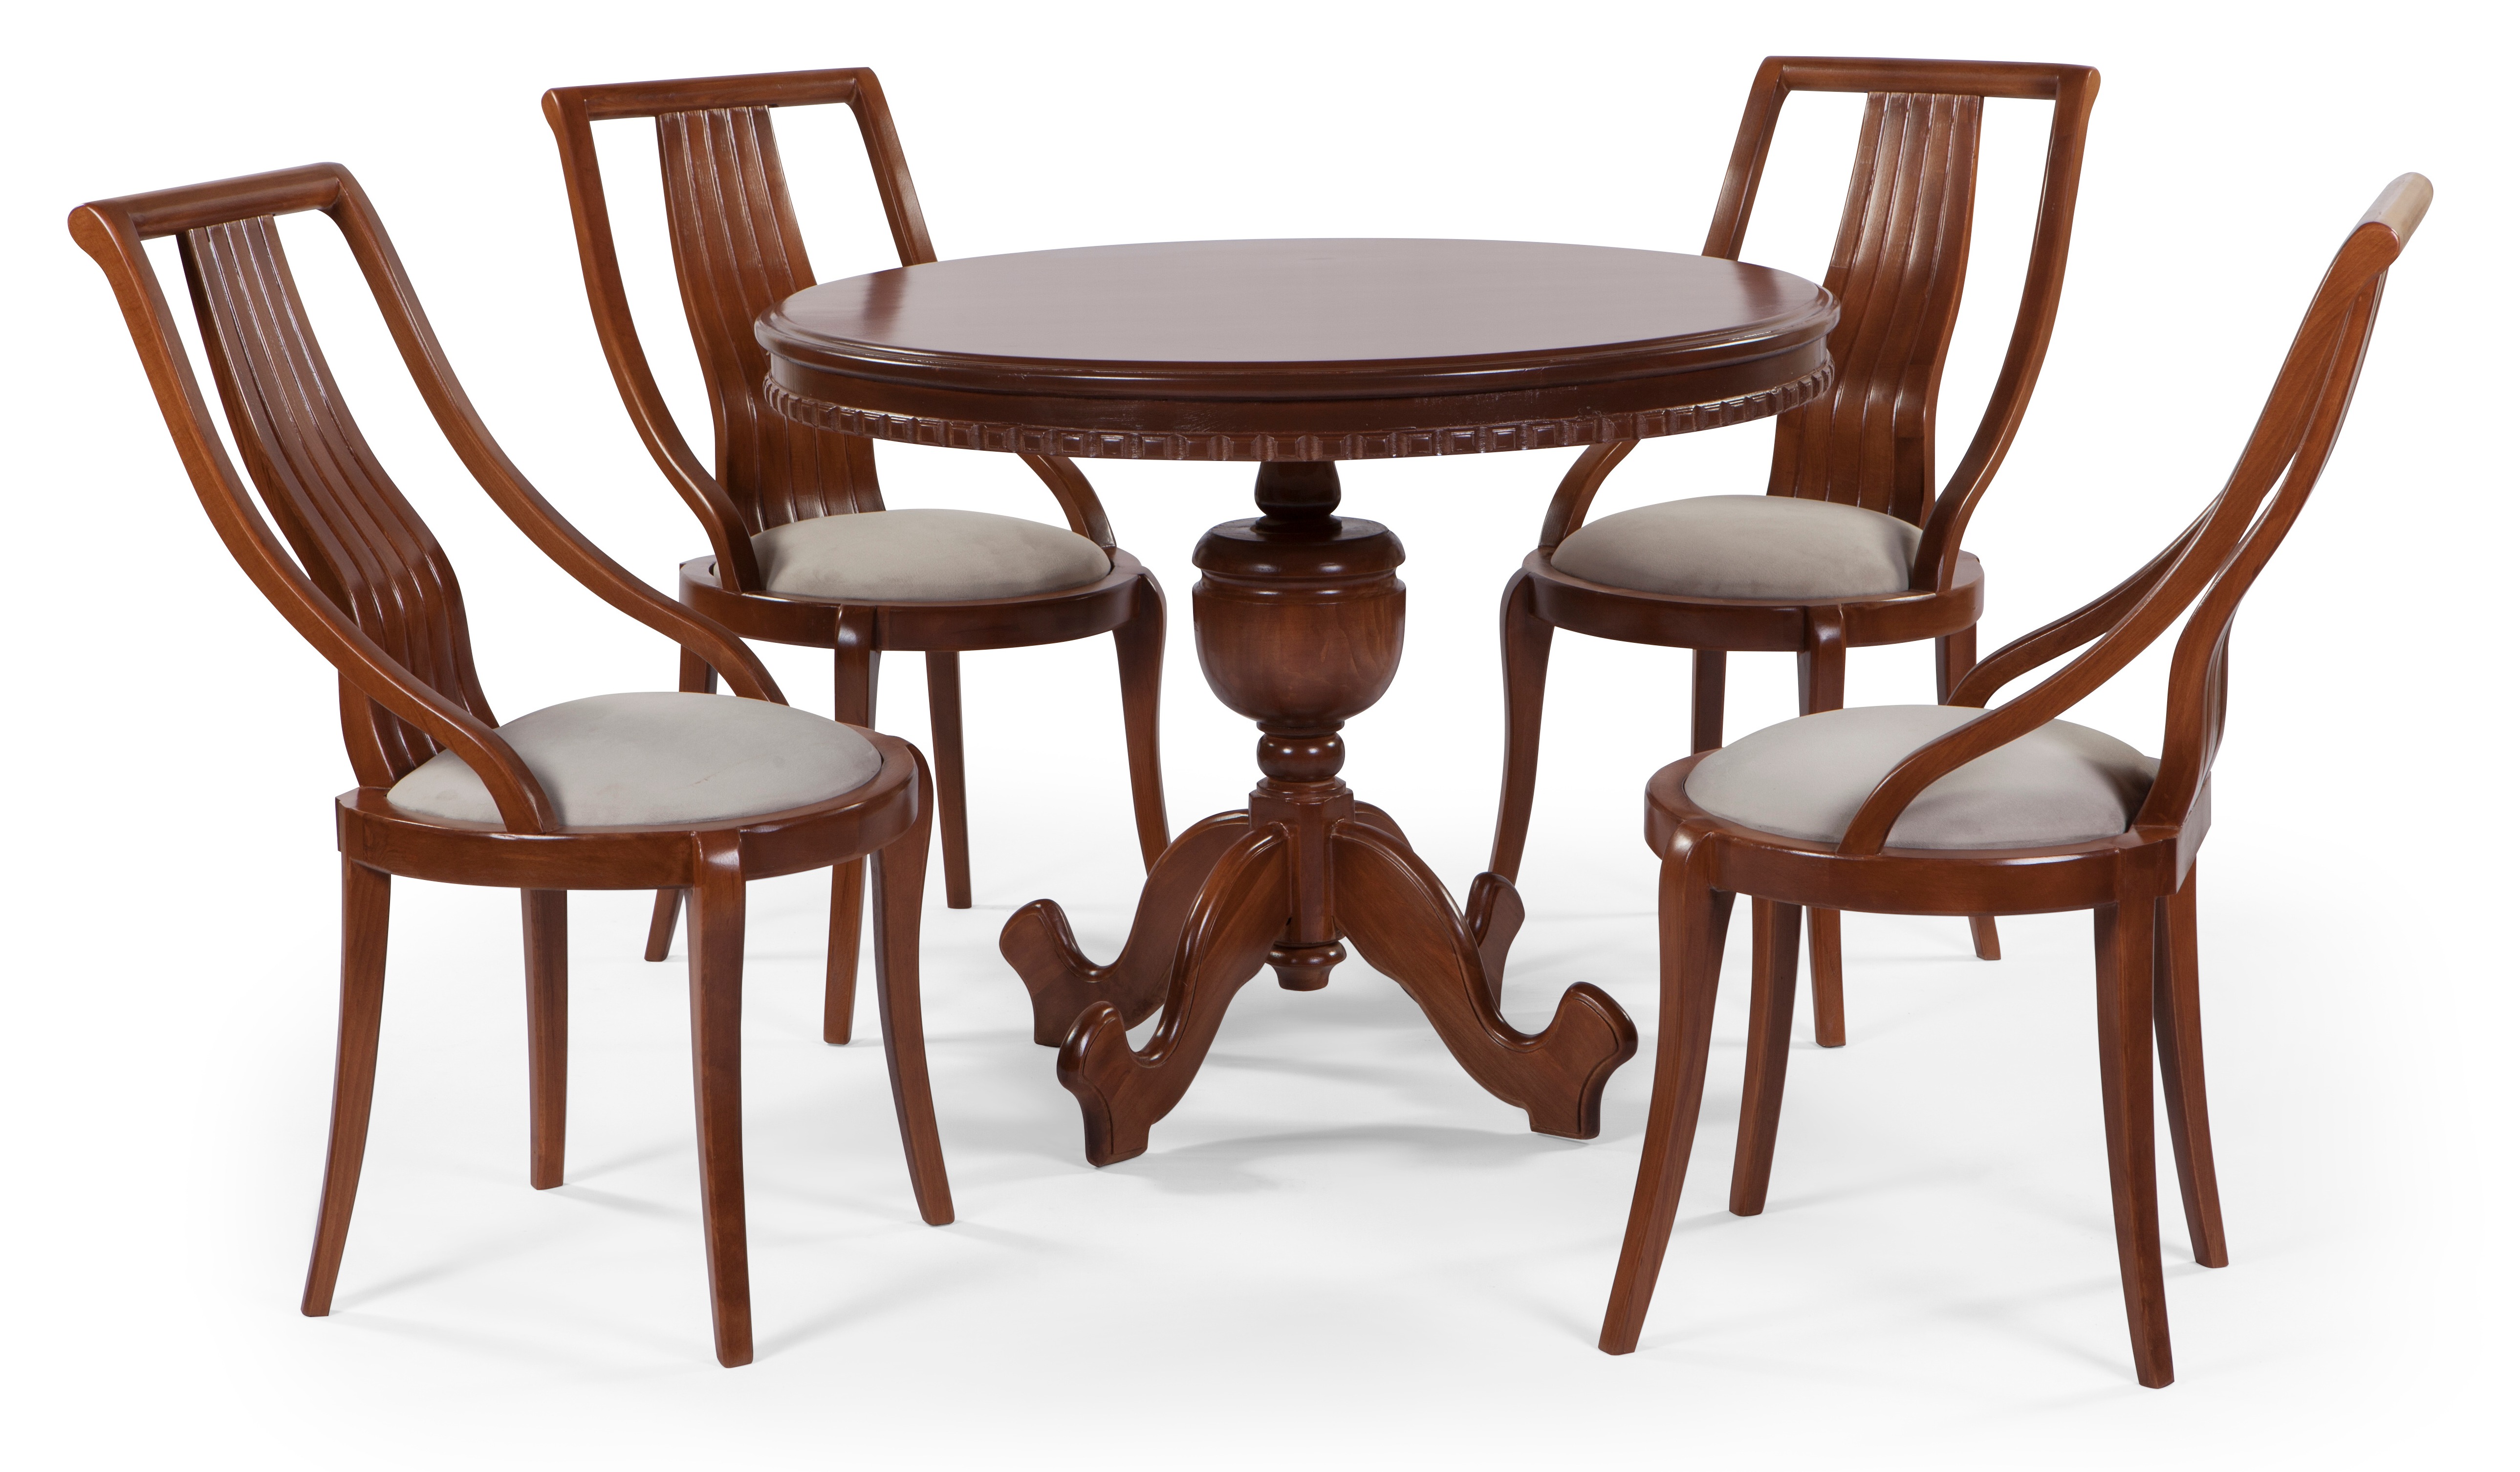 Refinished-Wood-Round-Table-and-Chairs